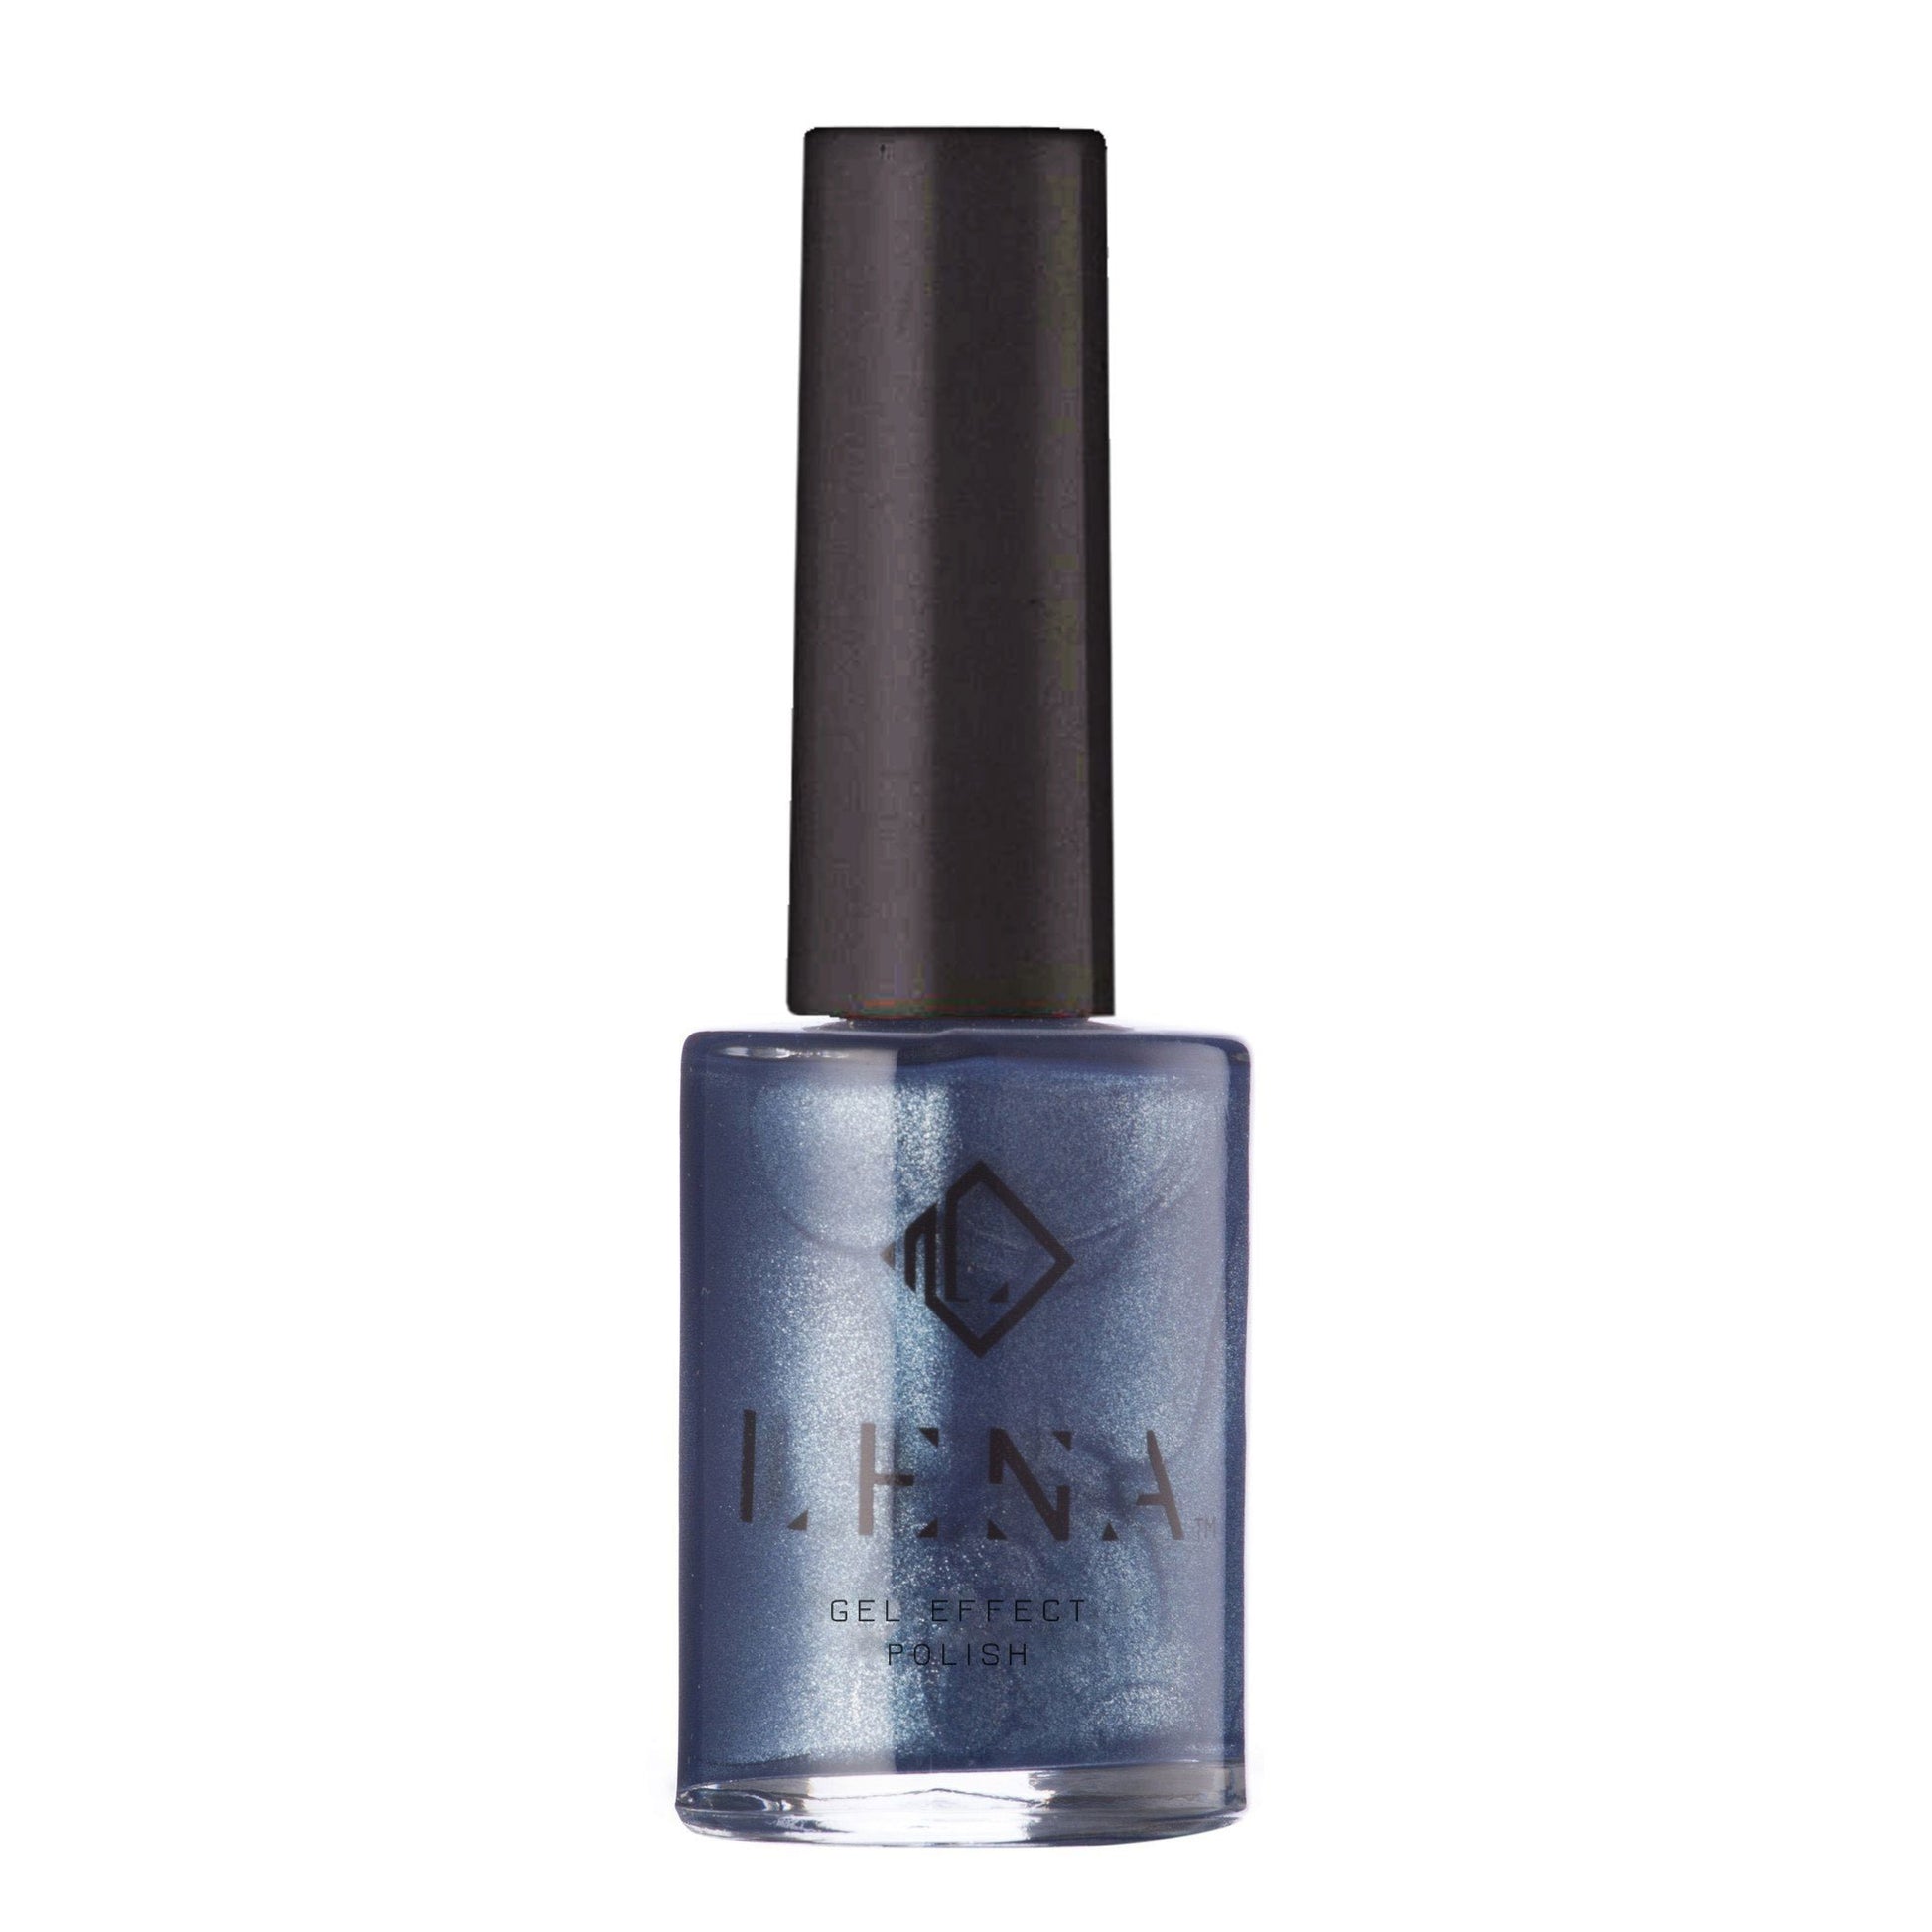 cant-forget-about-blue-gel-effect-nail-polish-vegan-friendly